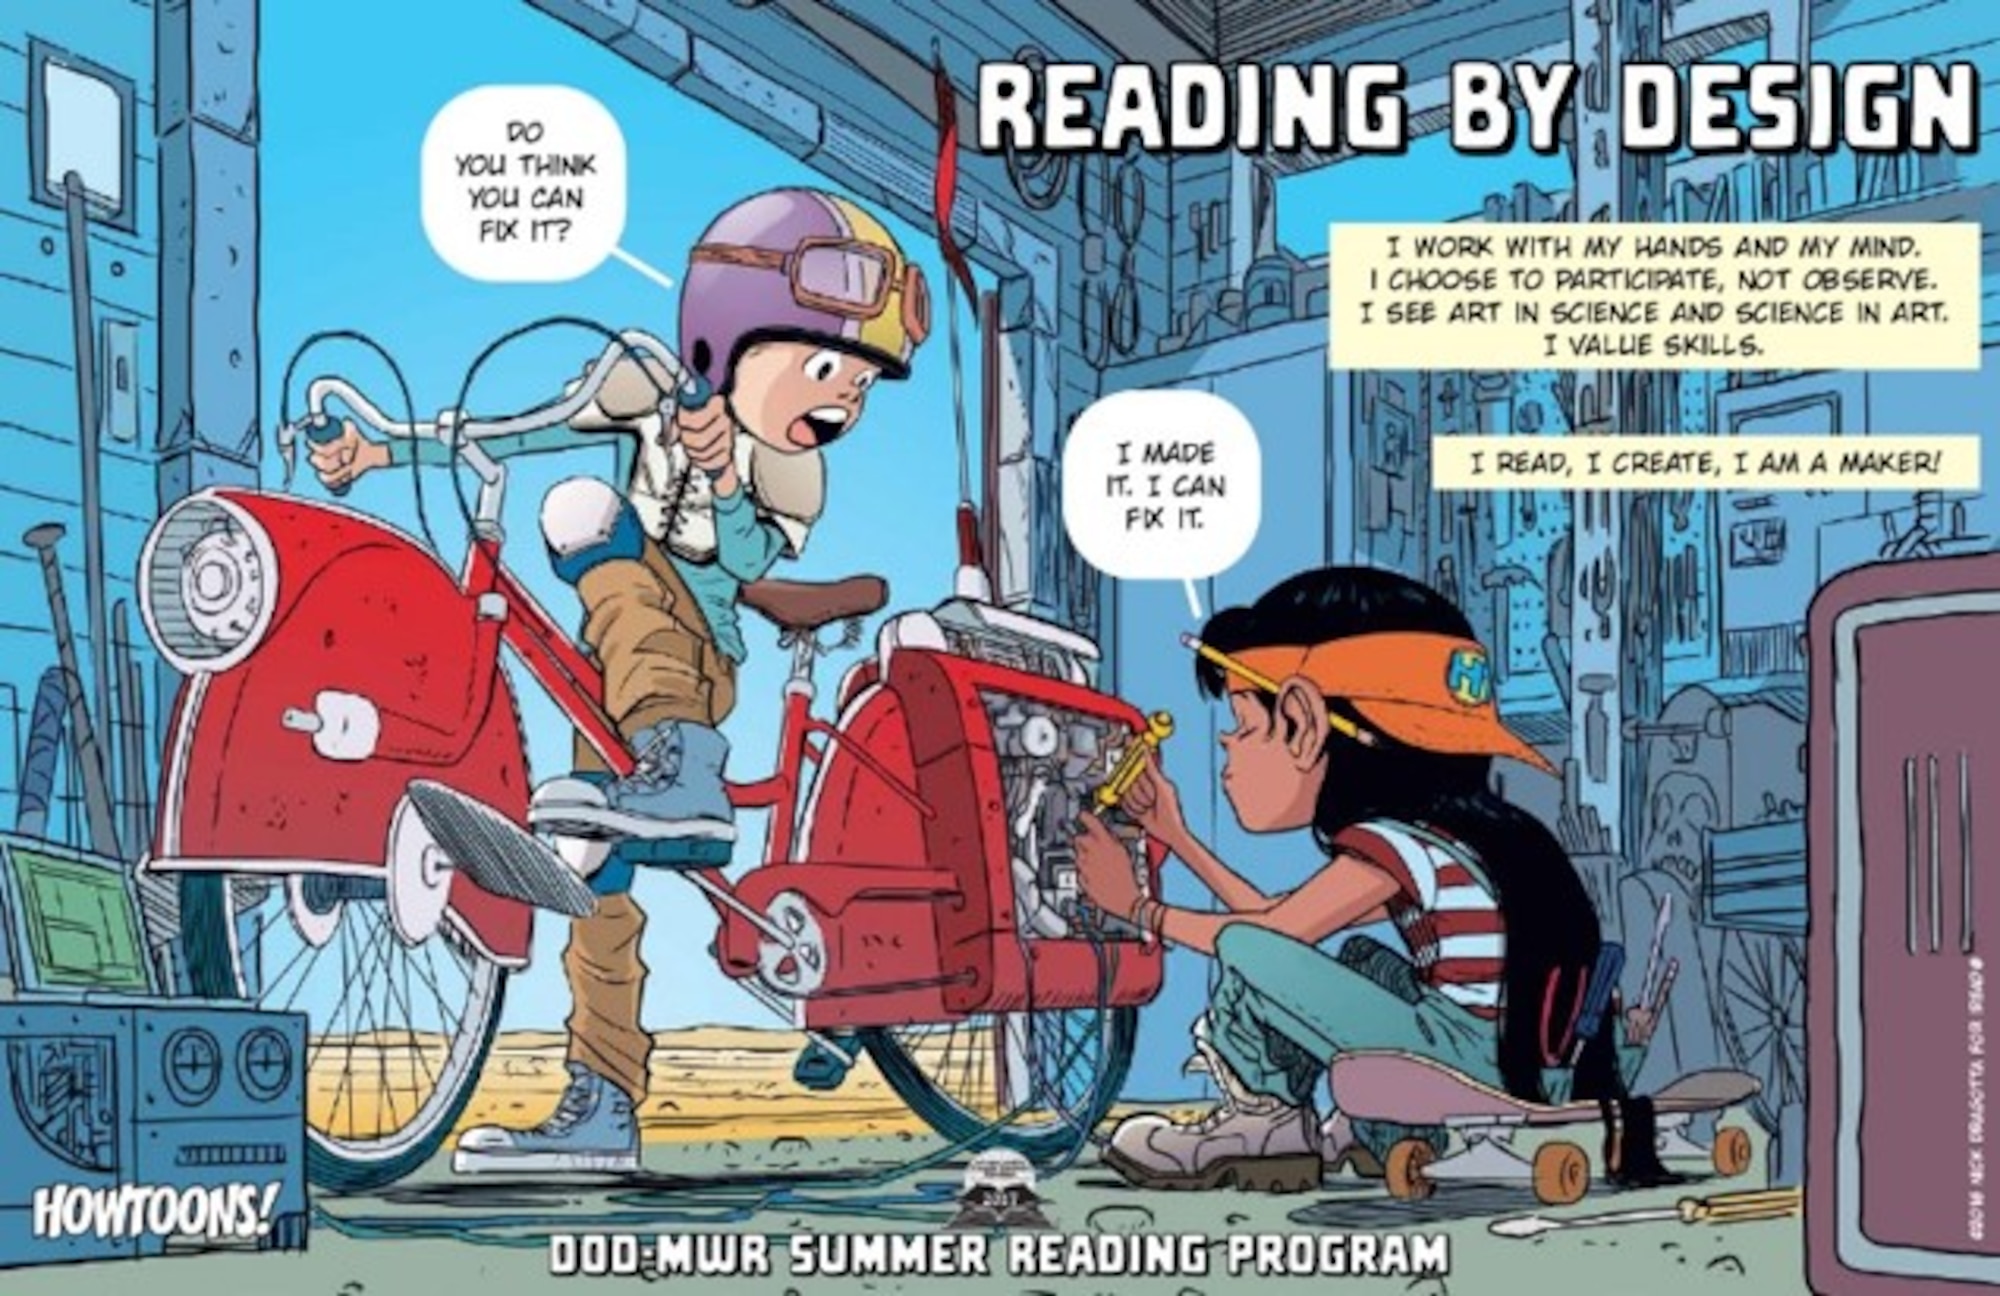 This year's DoD Summer Reading Program's theme is "Reading by Design," which incorporates the STEAM theme of science, technology, engineering, art and math.